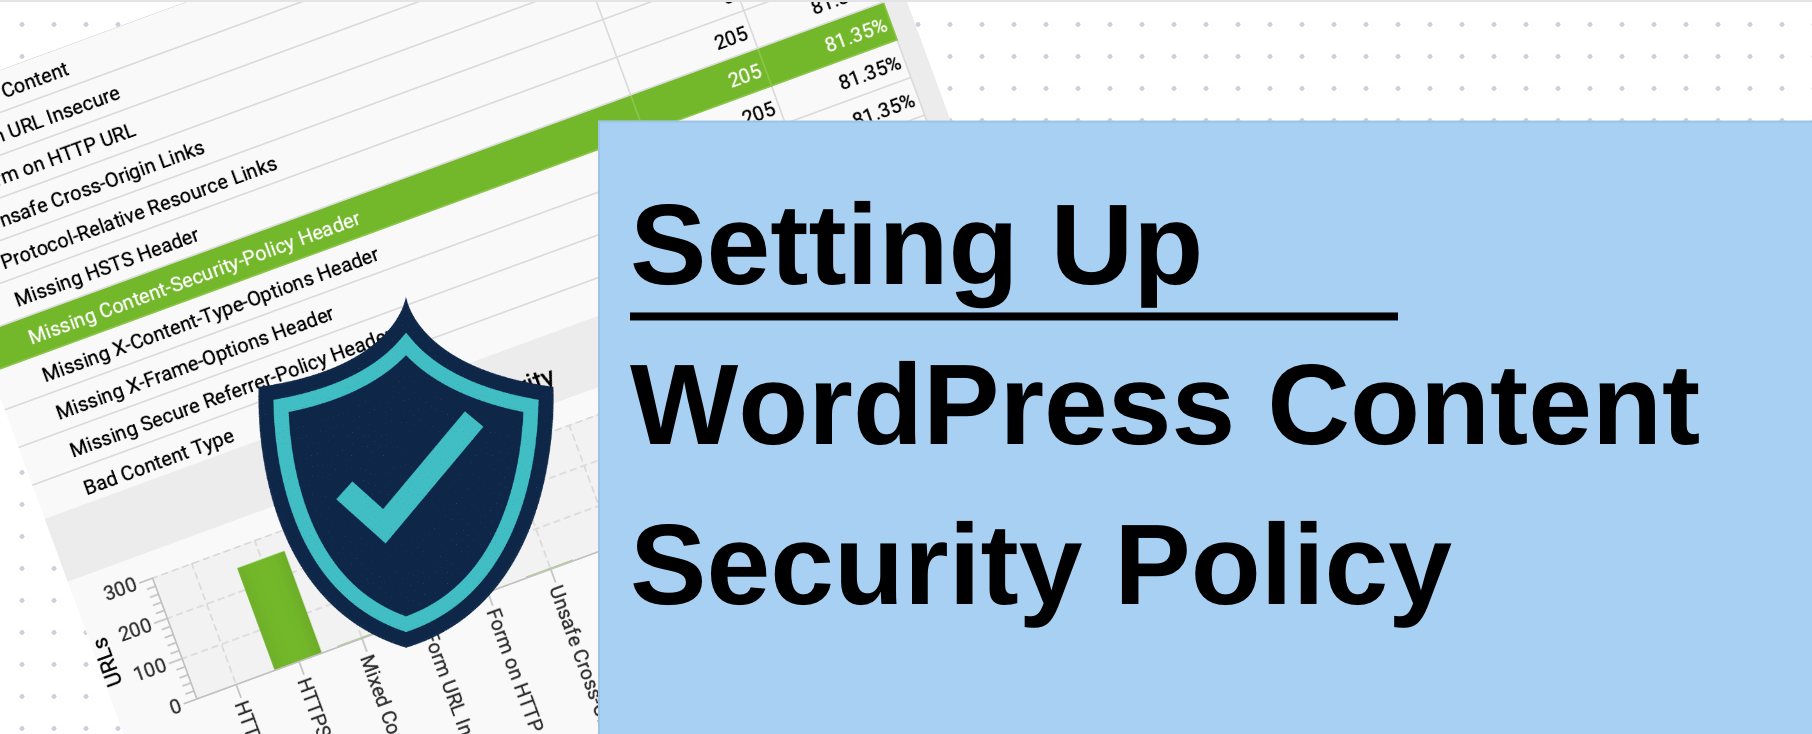 wordpress content security policy headers setting up